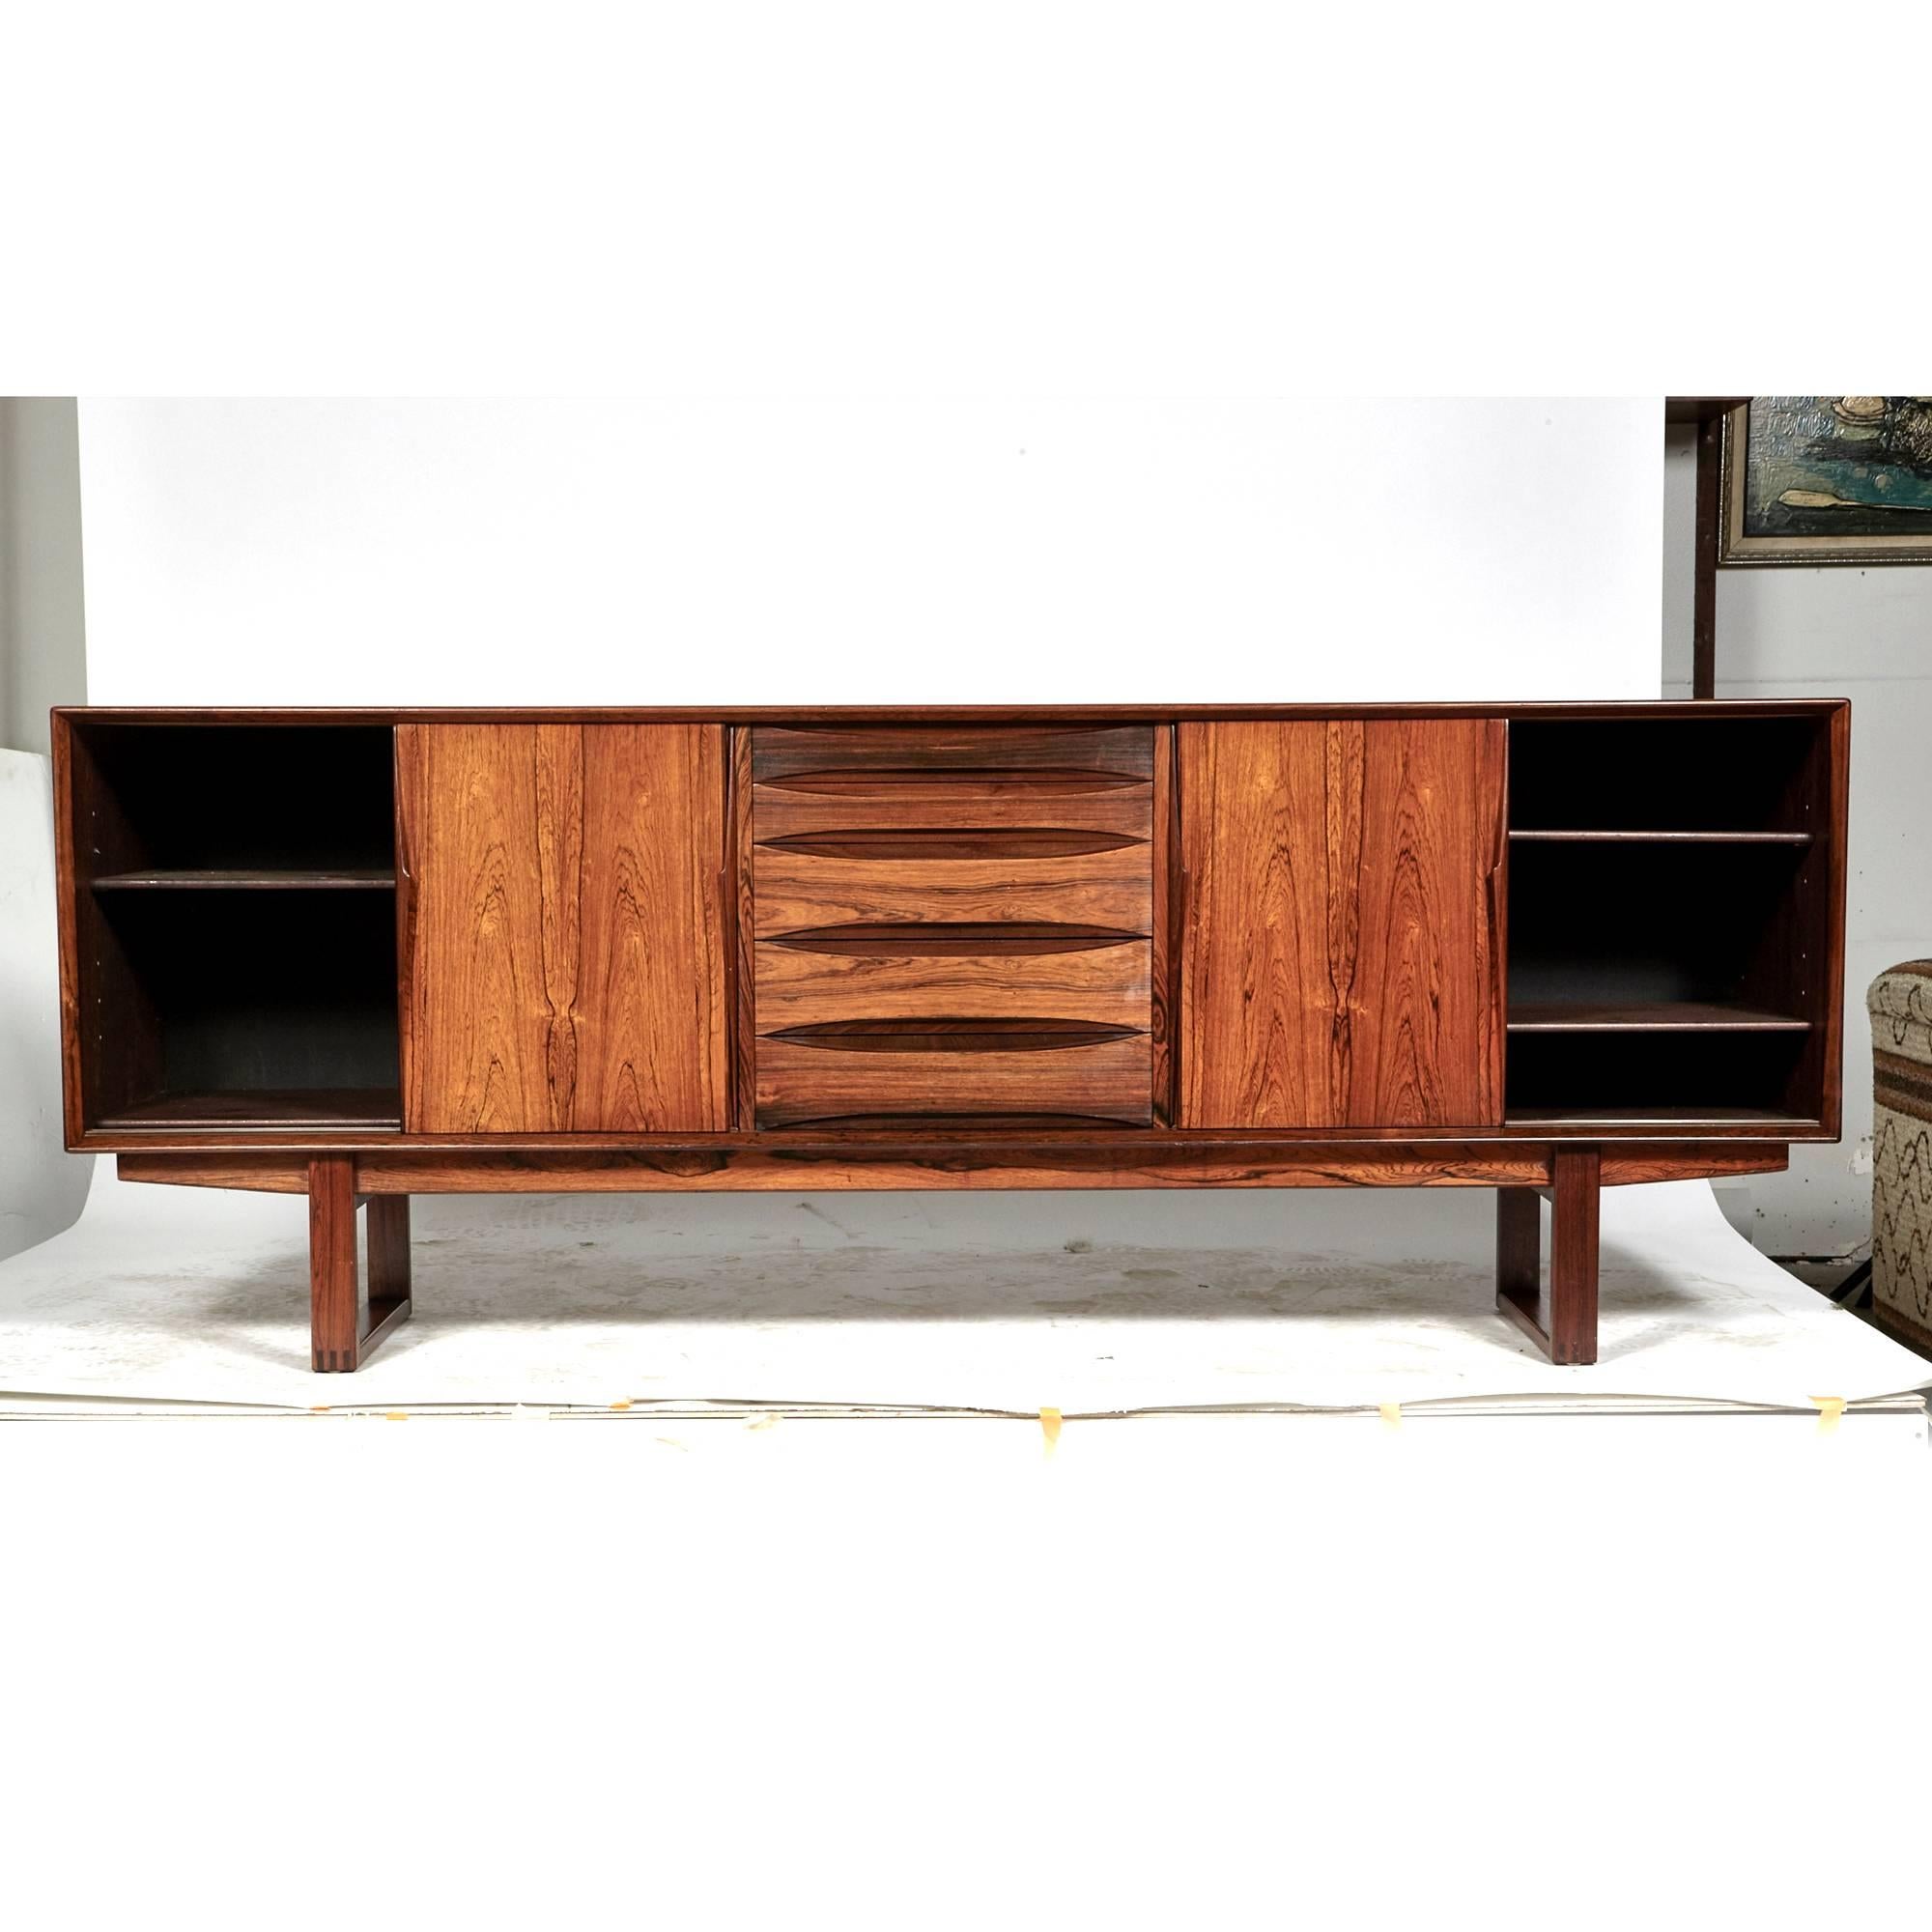 20th Century Danish Rosewood Credenza with Sled Legs by Arne Vodder, 1960s For Sale